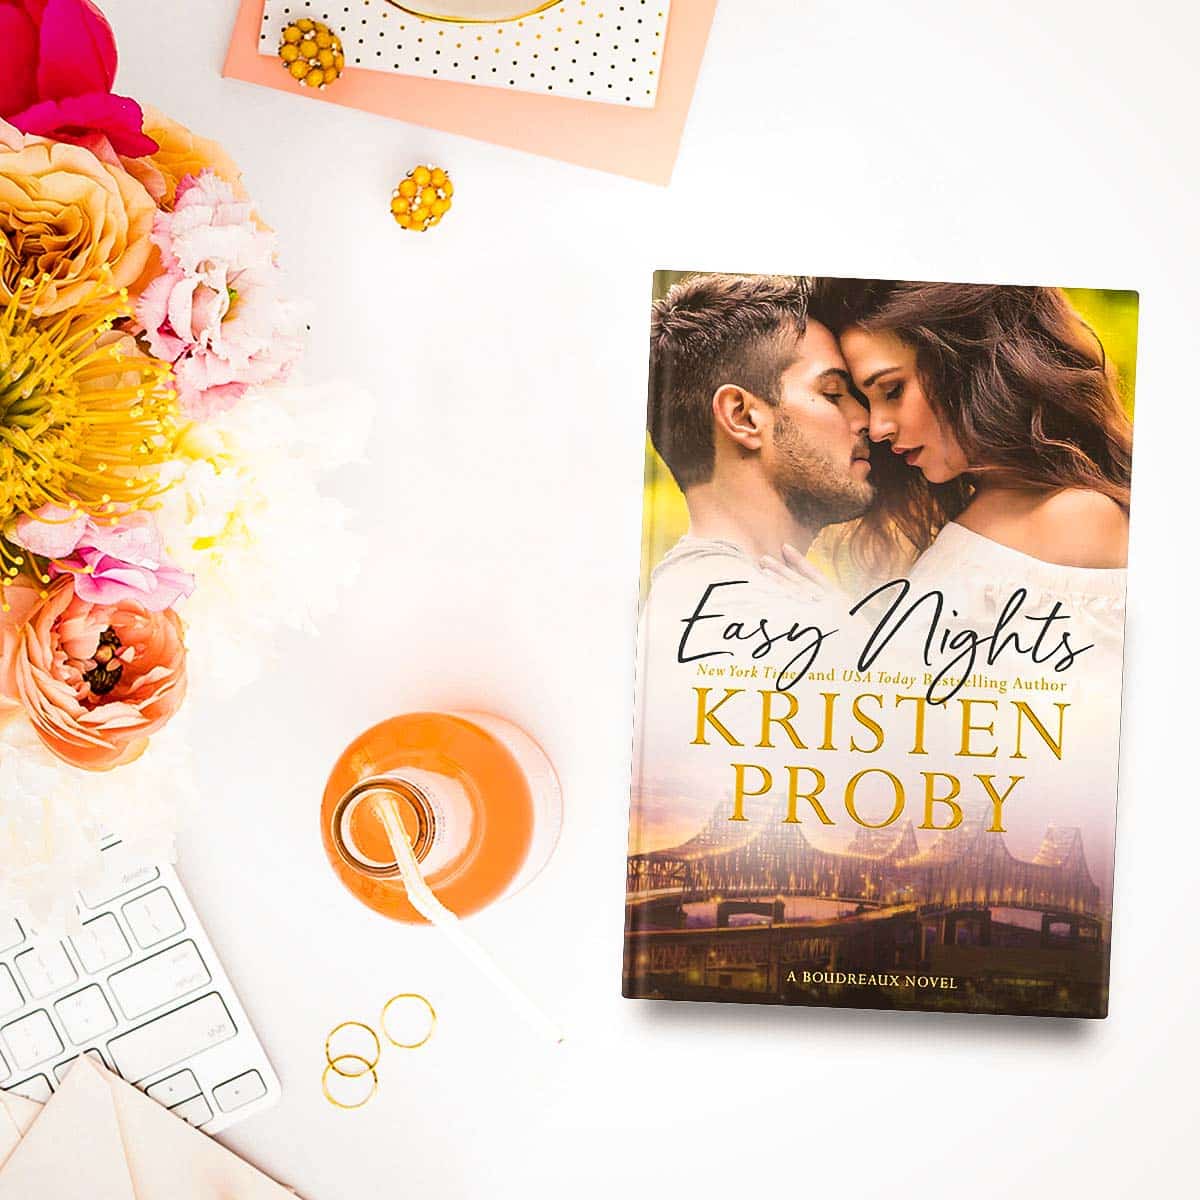 The 6th standalone title in the Boudreaux Series, EASY NIGHTS by Kristen Proby is Savannah and Ben’s highly anticipated story! Enjoy an excerpt and grab a copy!